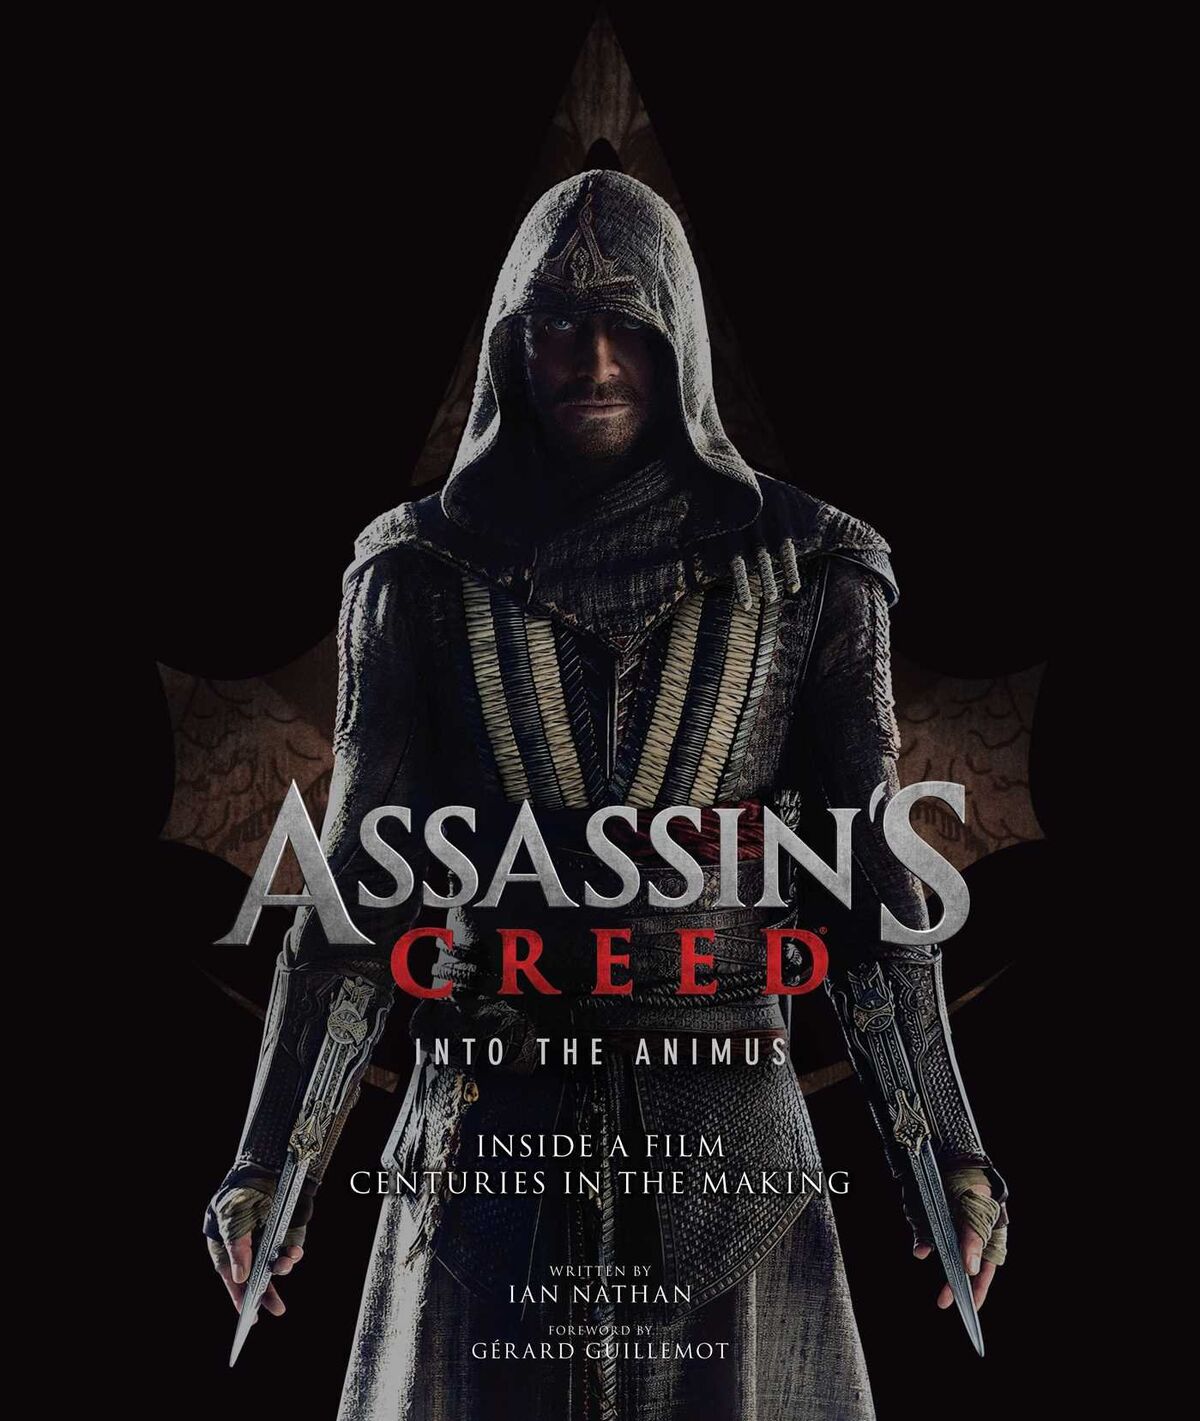 Assassin's Creed 2 (2016) Death Count 